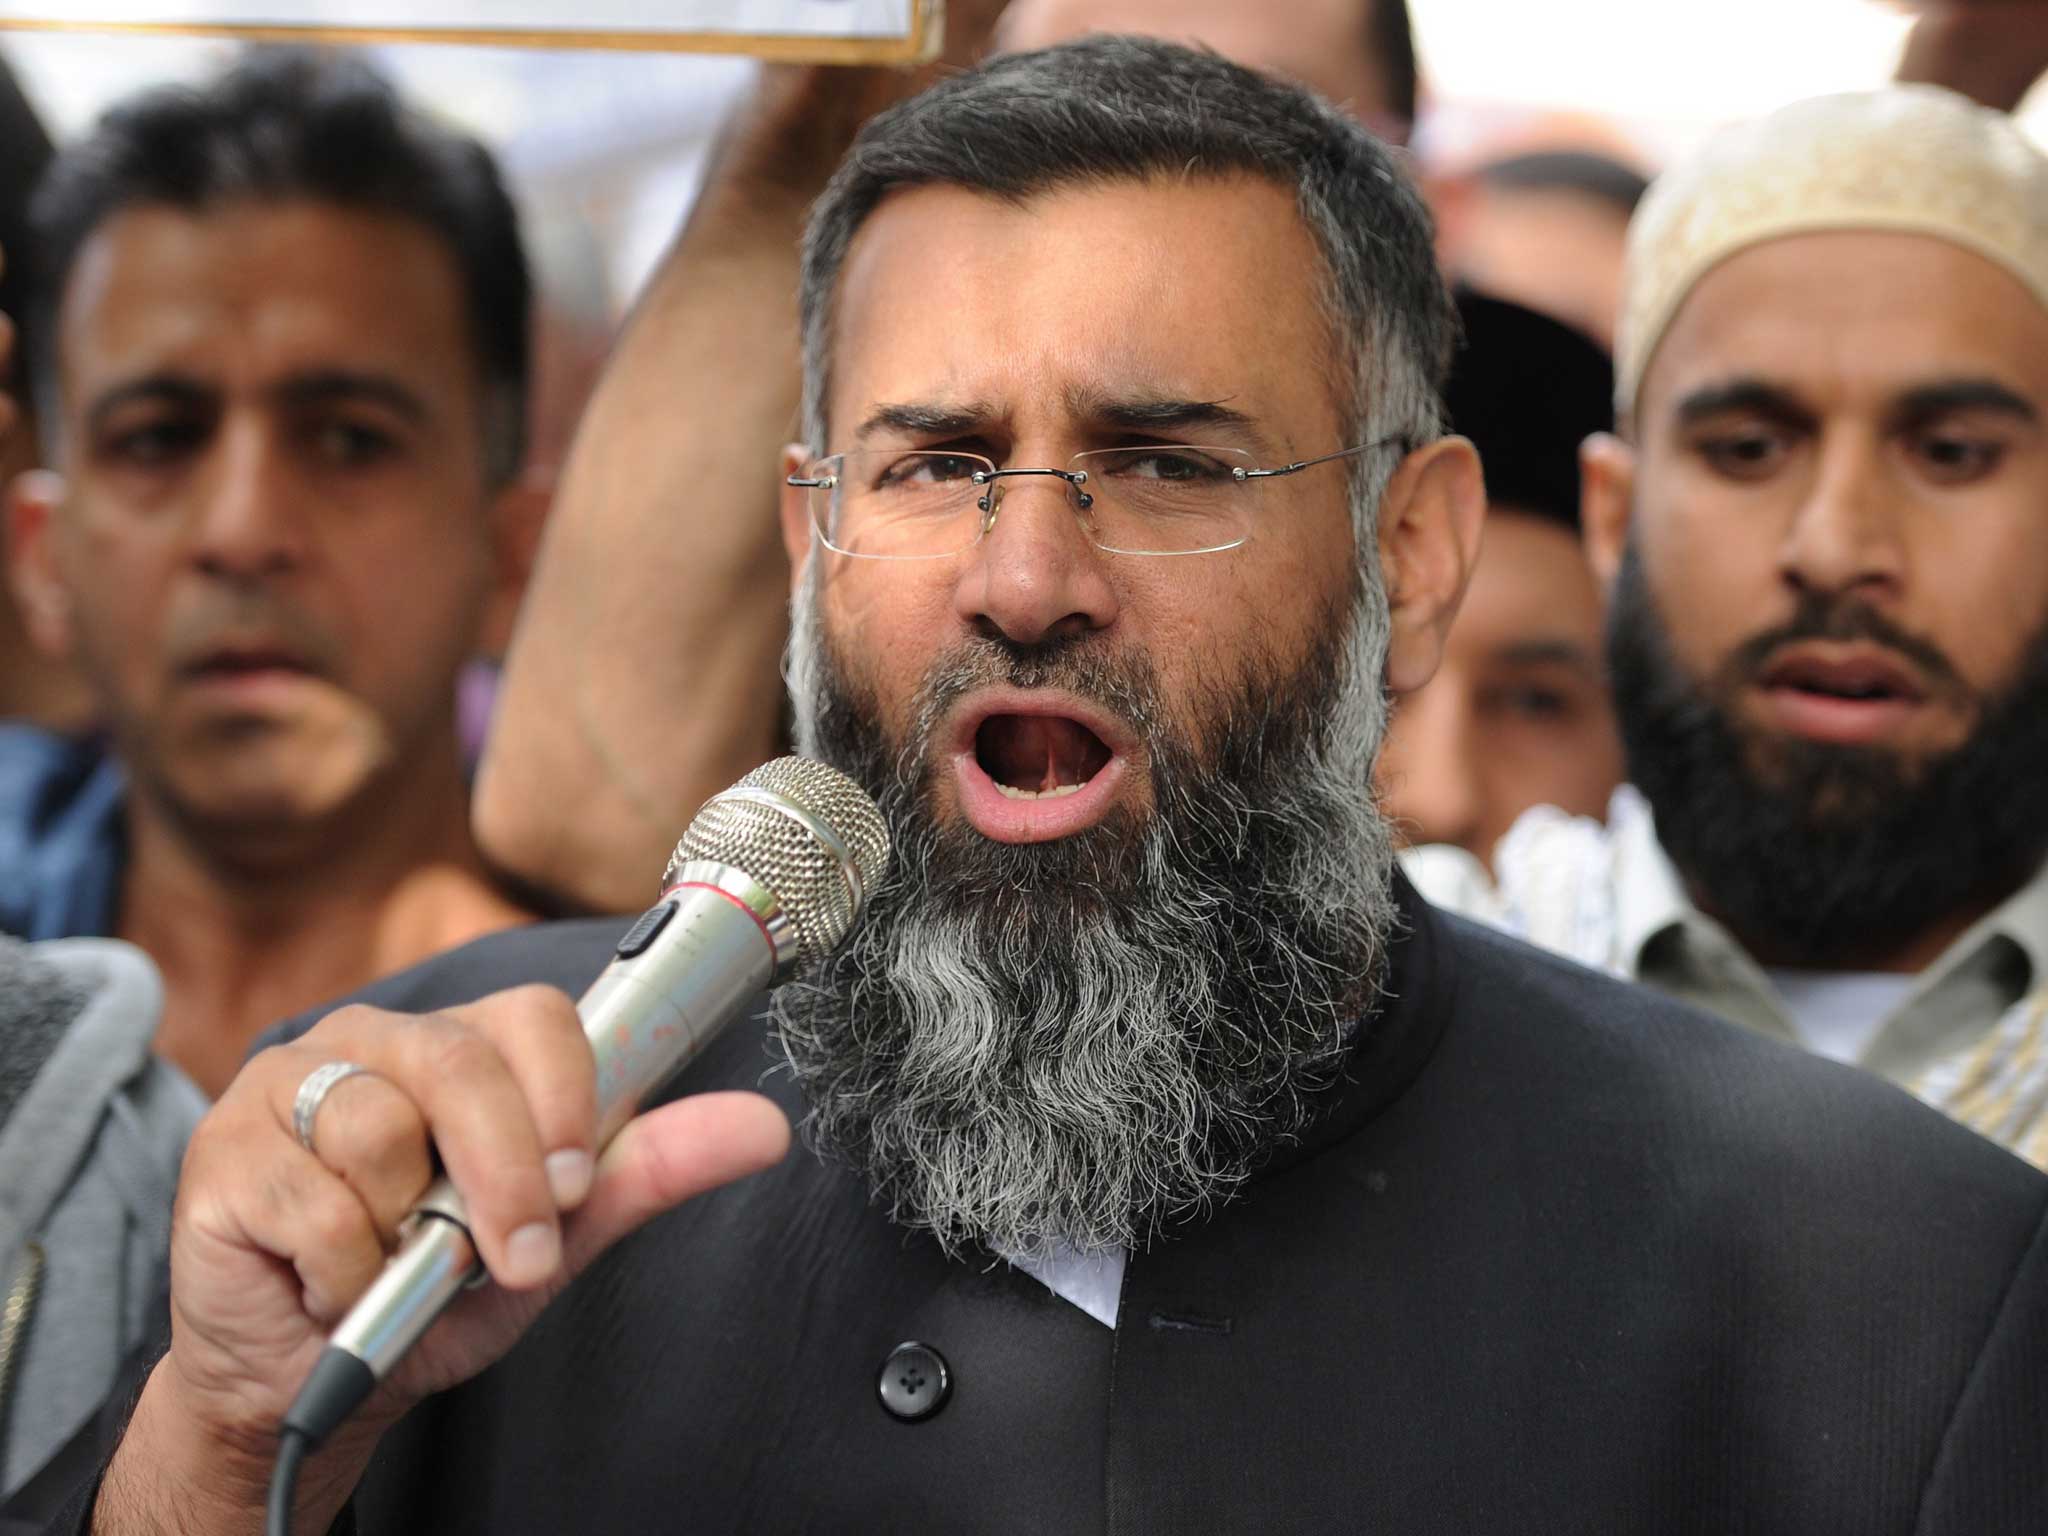 Anjem Choudary told Muslims it was a 'sin' to vote